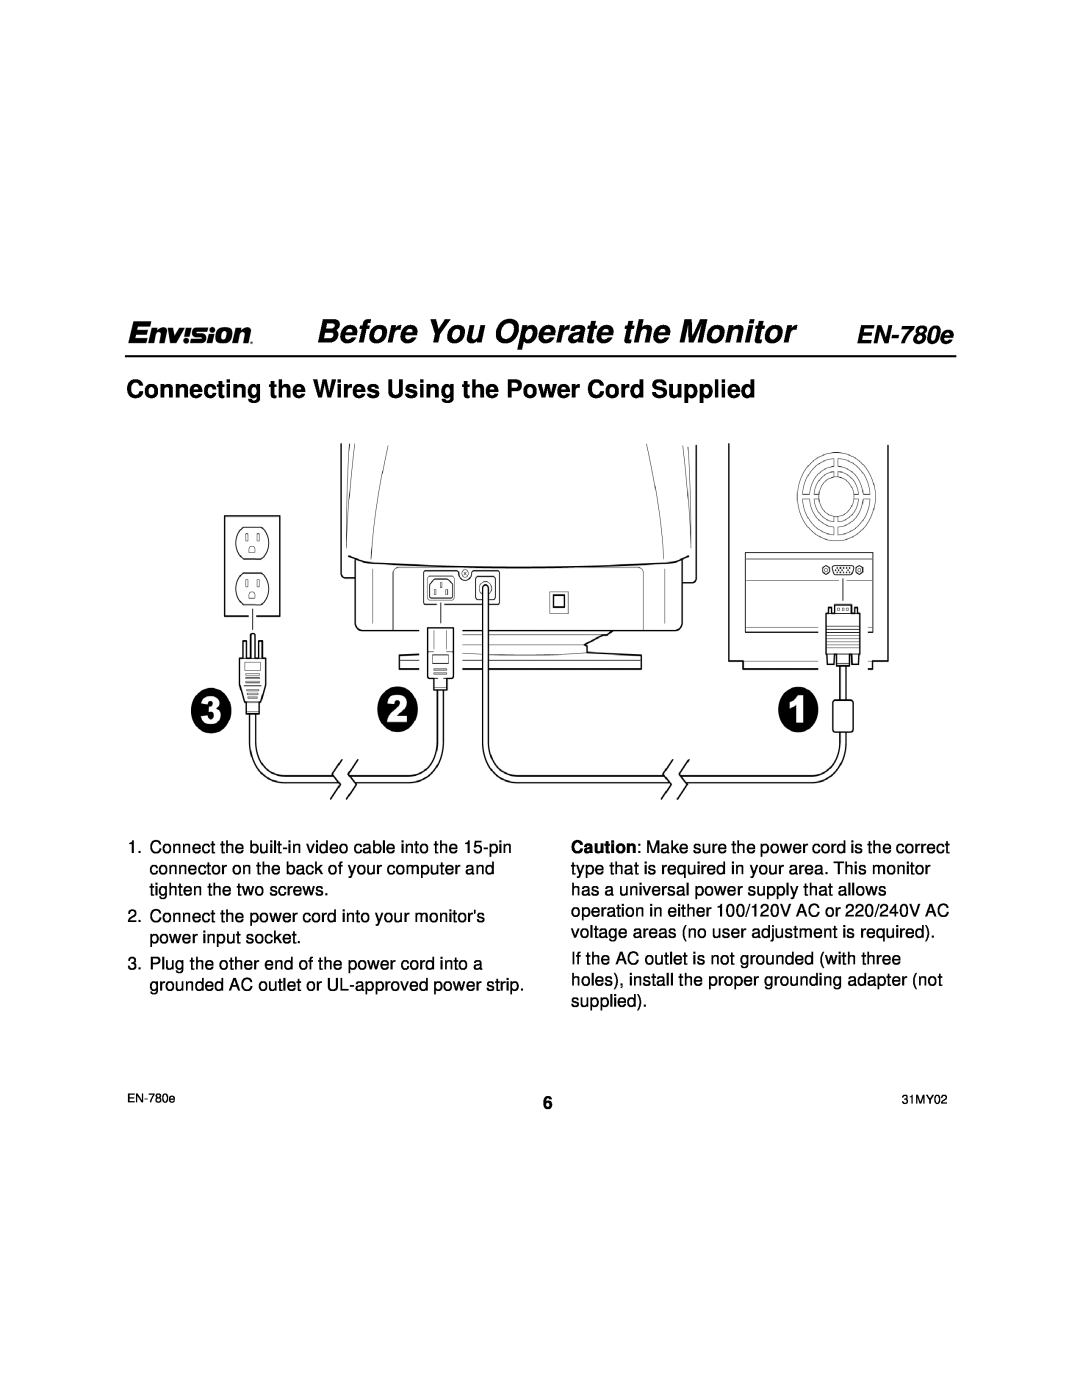 Envision Peripherals EN-780e user manual Connecting the Wires Using the Power Cord Supplied, Before You Operate the Monitor 